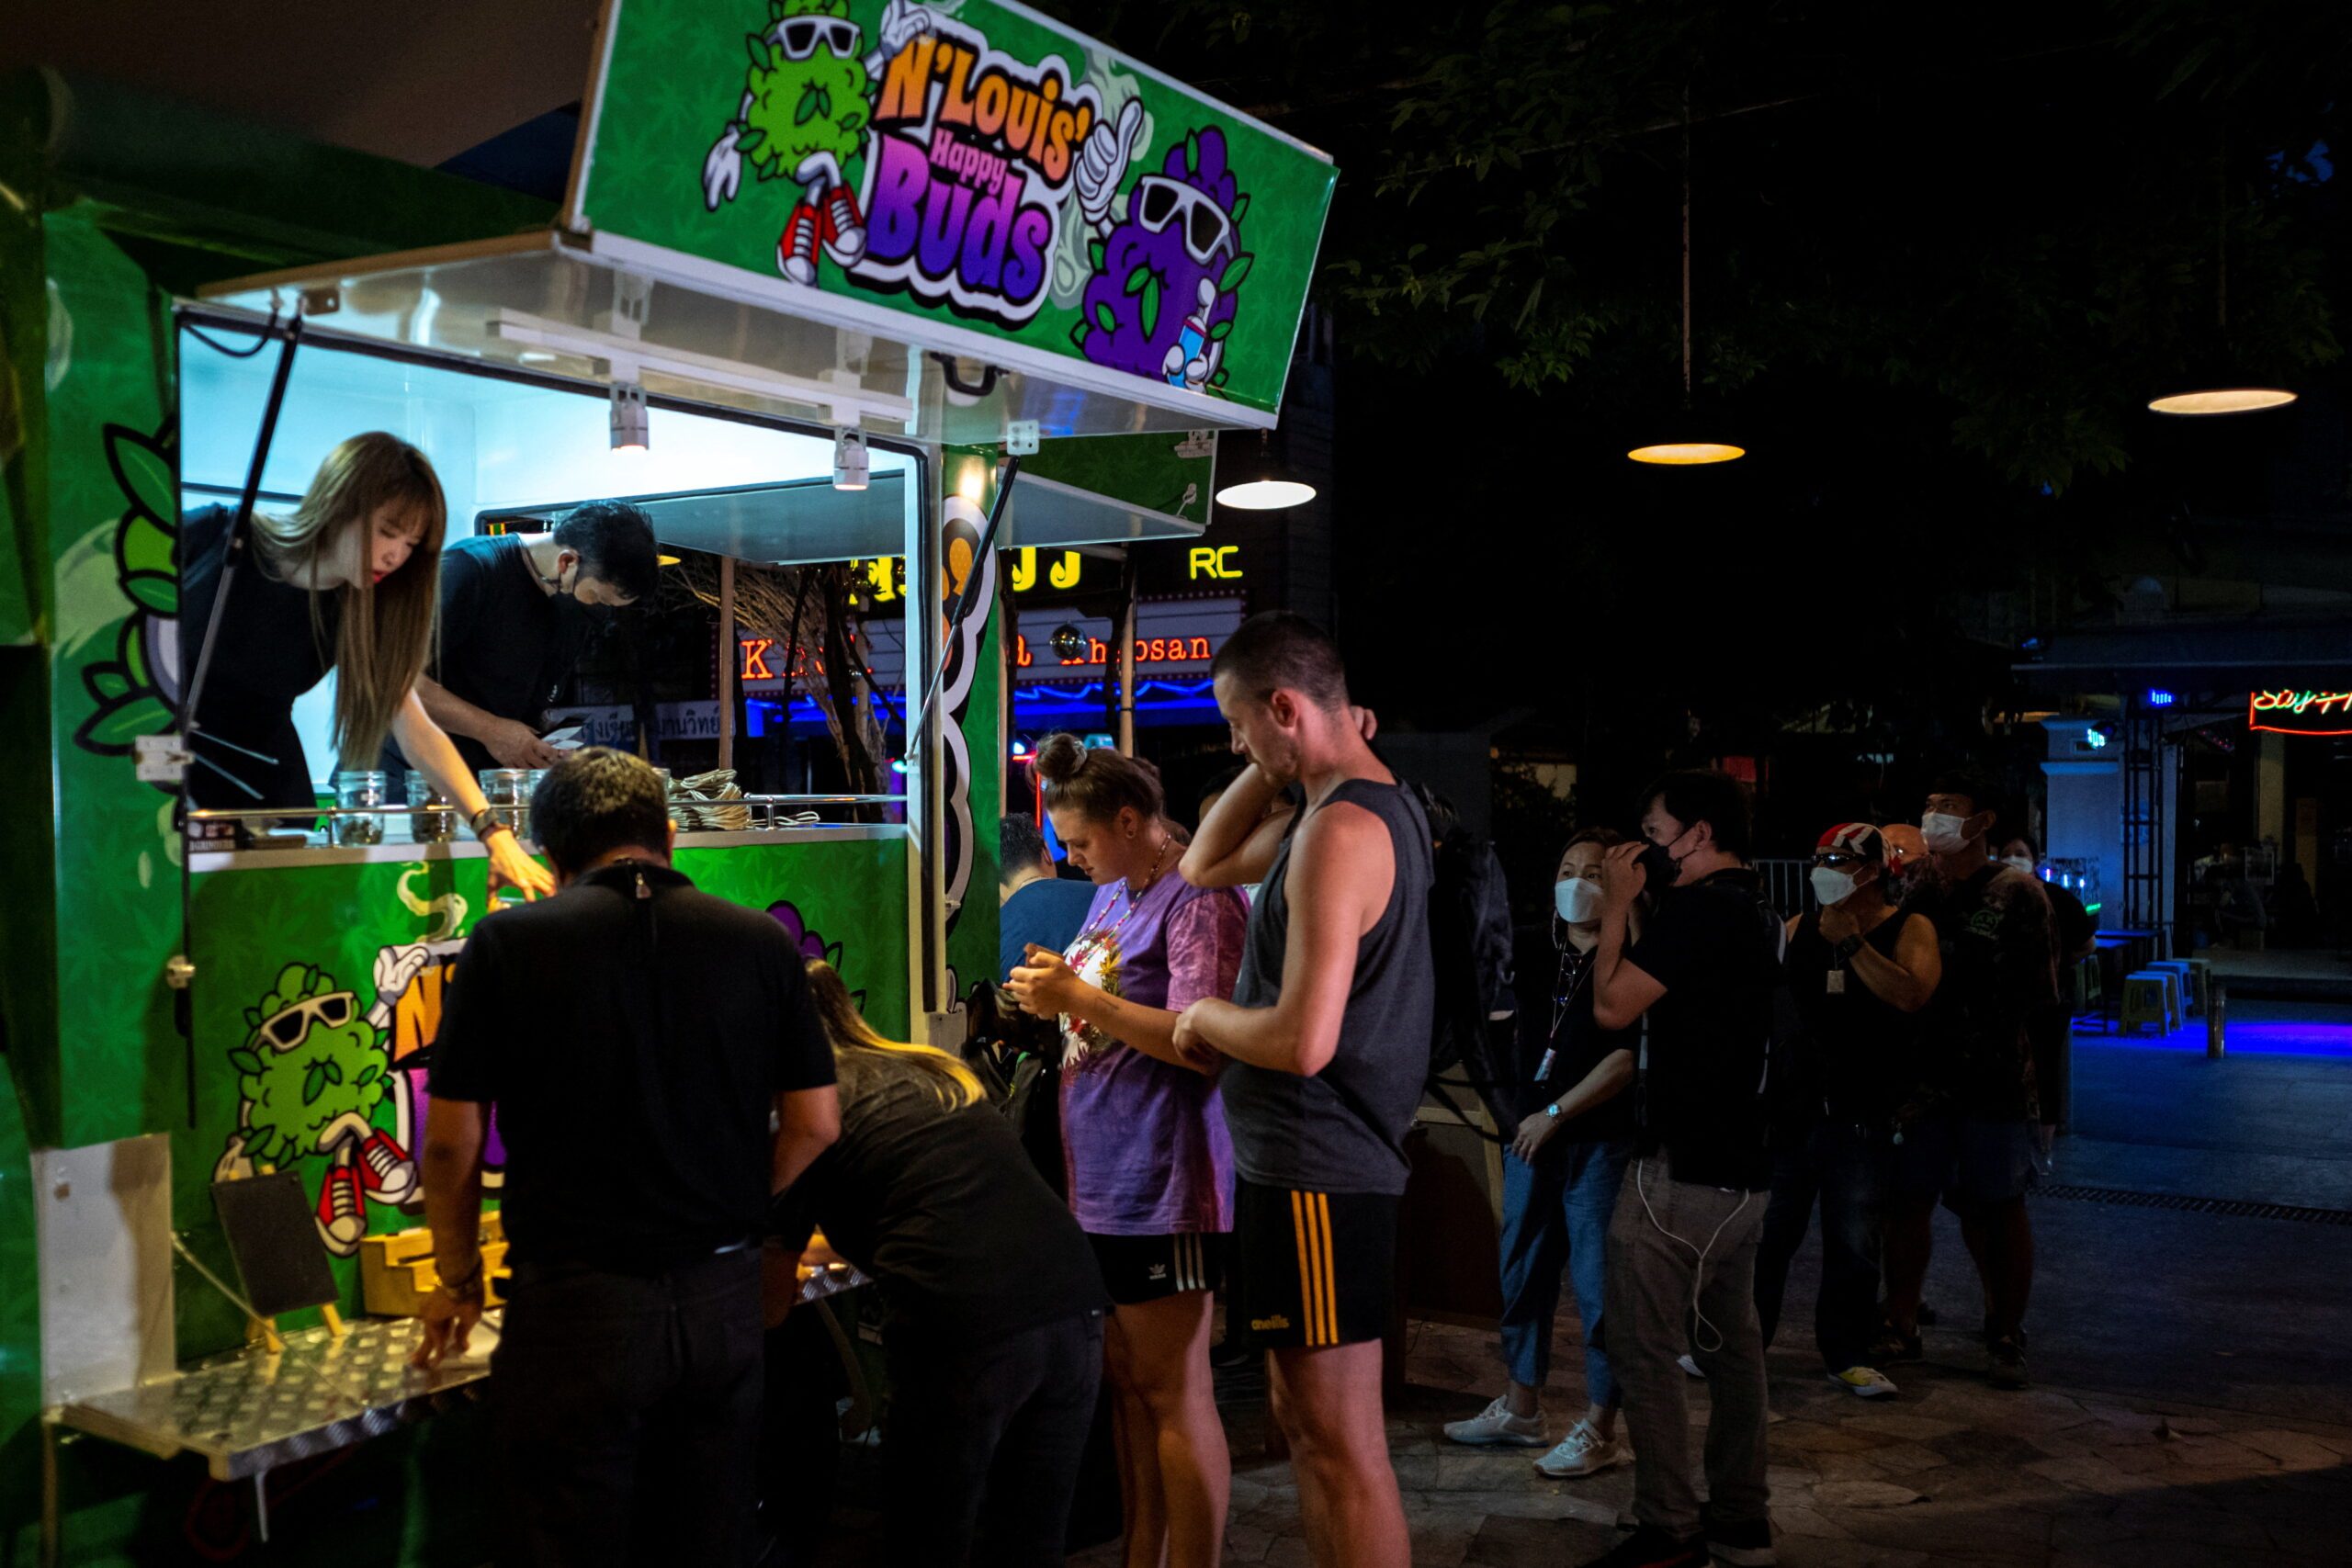 LOOK: Bangkok’s cannabis pop-up truck proves popular with tourists